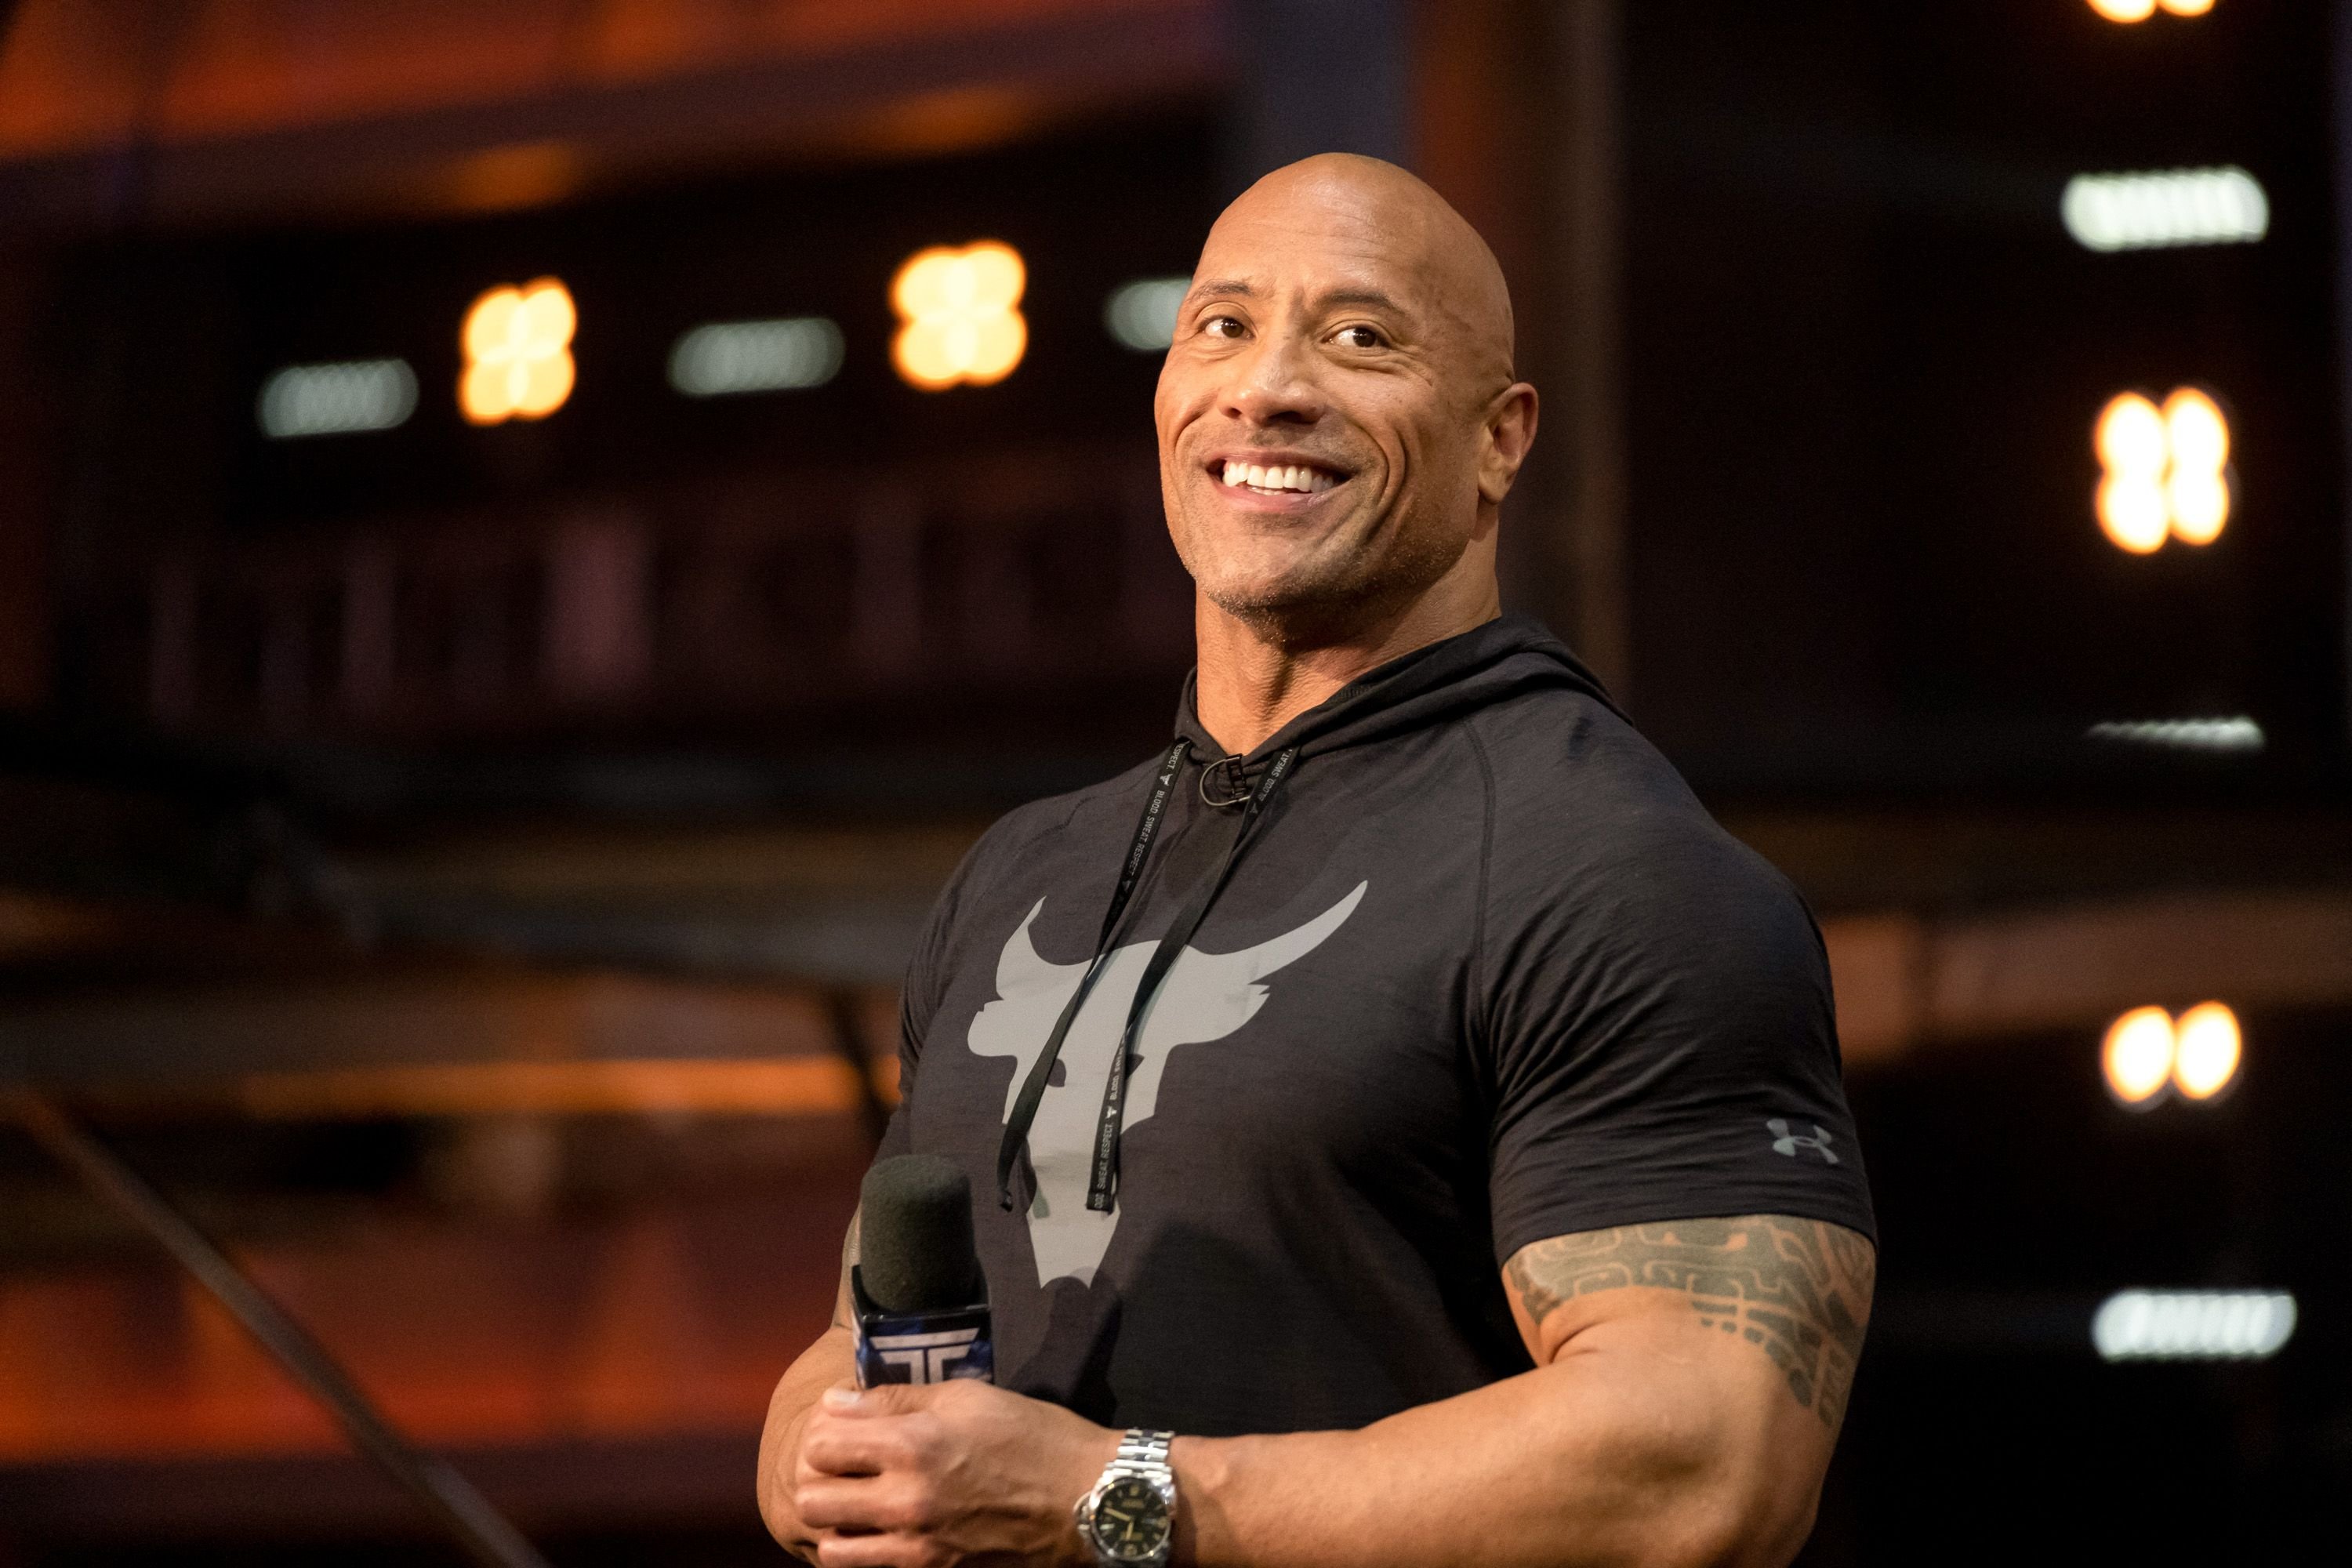 Dwayne Johnson on the set of season 2 of "The Titan Games" for its West Region Premiere on February 04, 2020 | Photo: Steve Dietl/NBC/NBCU Photo Bank/Getty Images